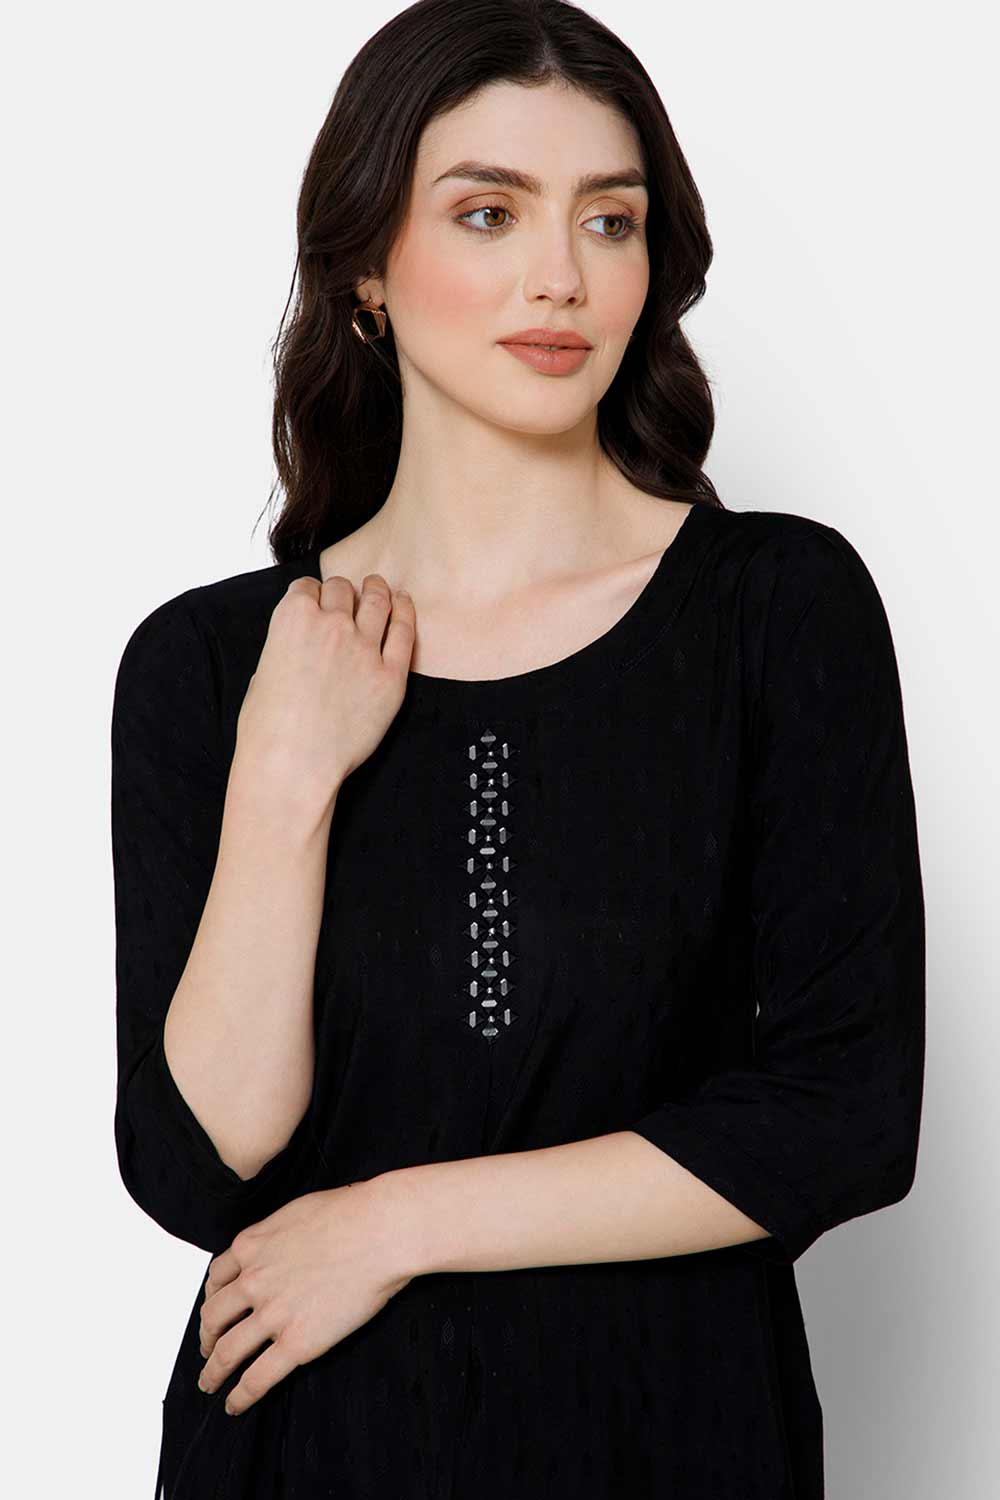 Mythri Women's Casual Tops with Mirror Work At The Center Front  - Black - E023